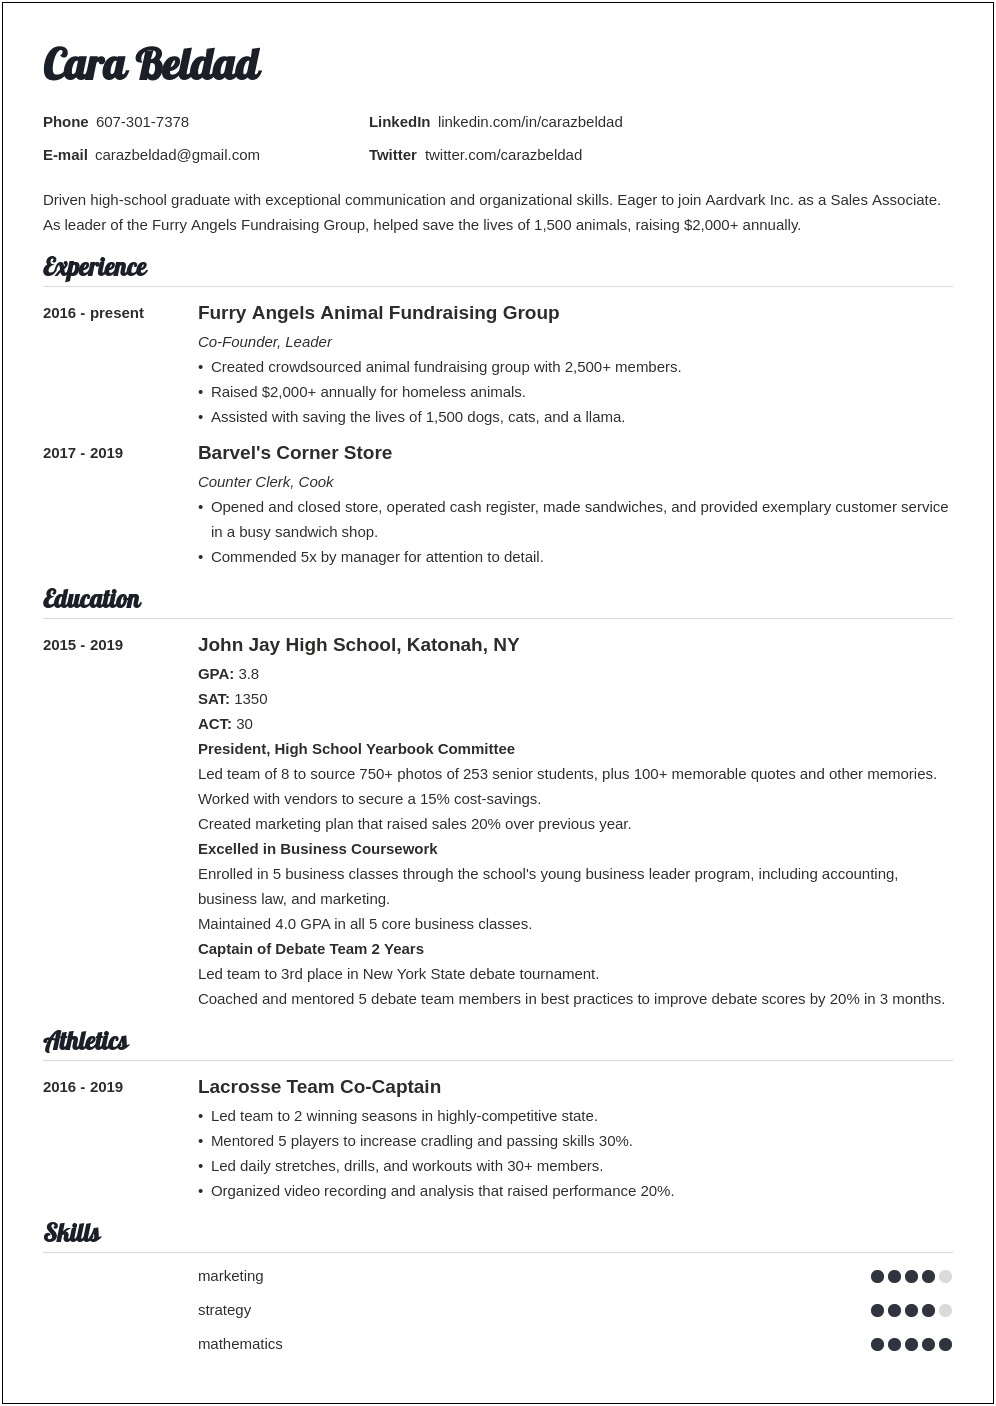 Resume Objective For New High School Graduate